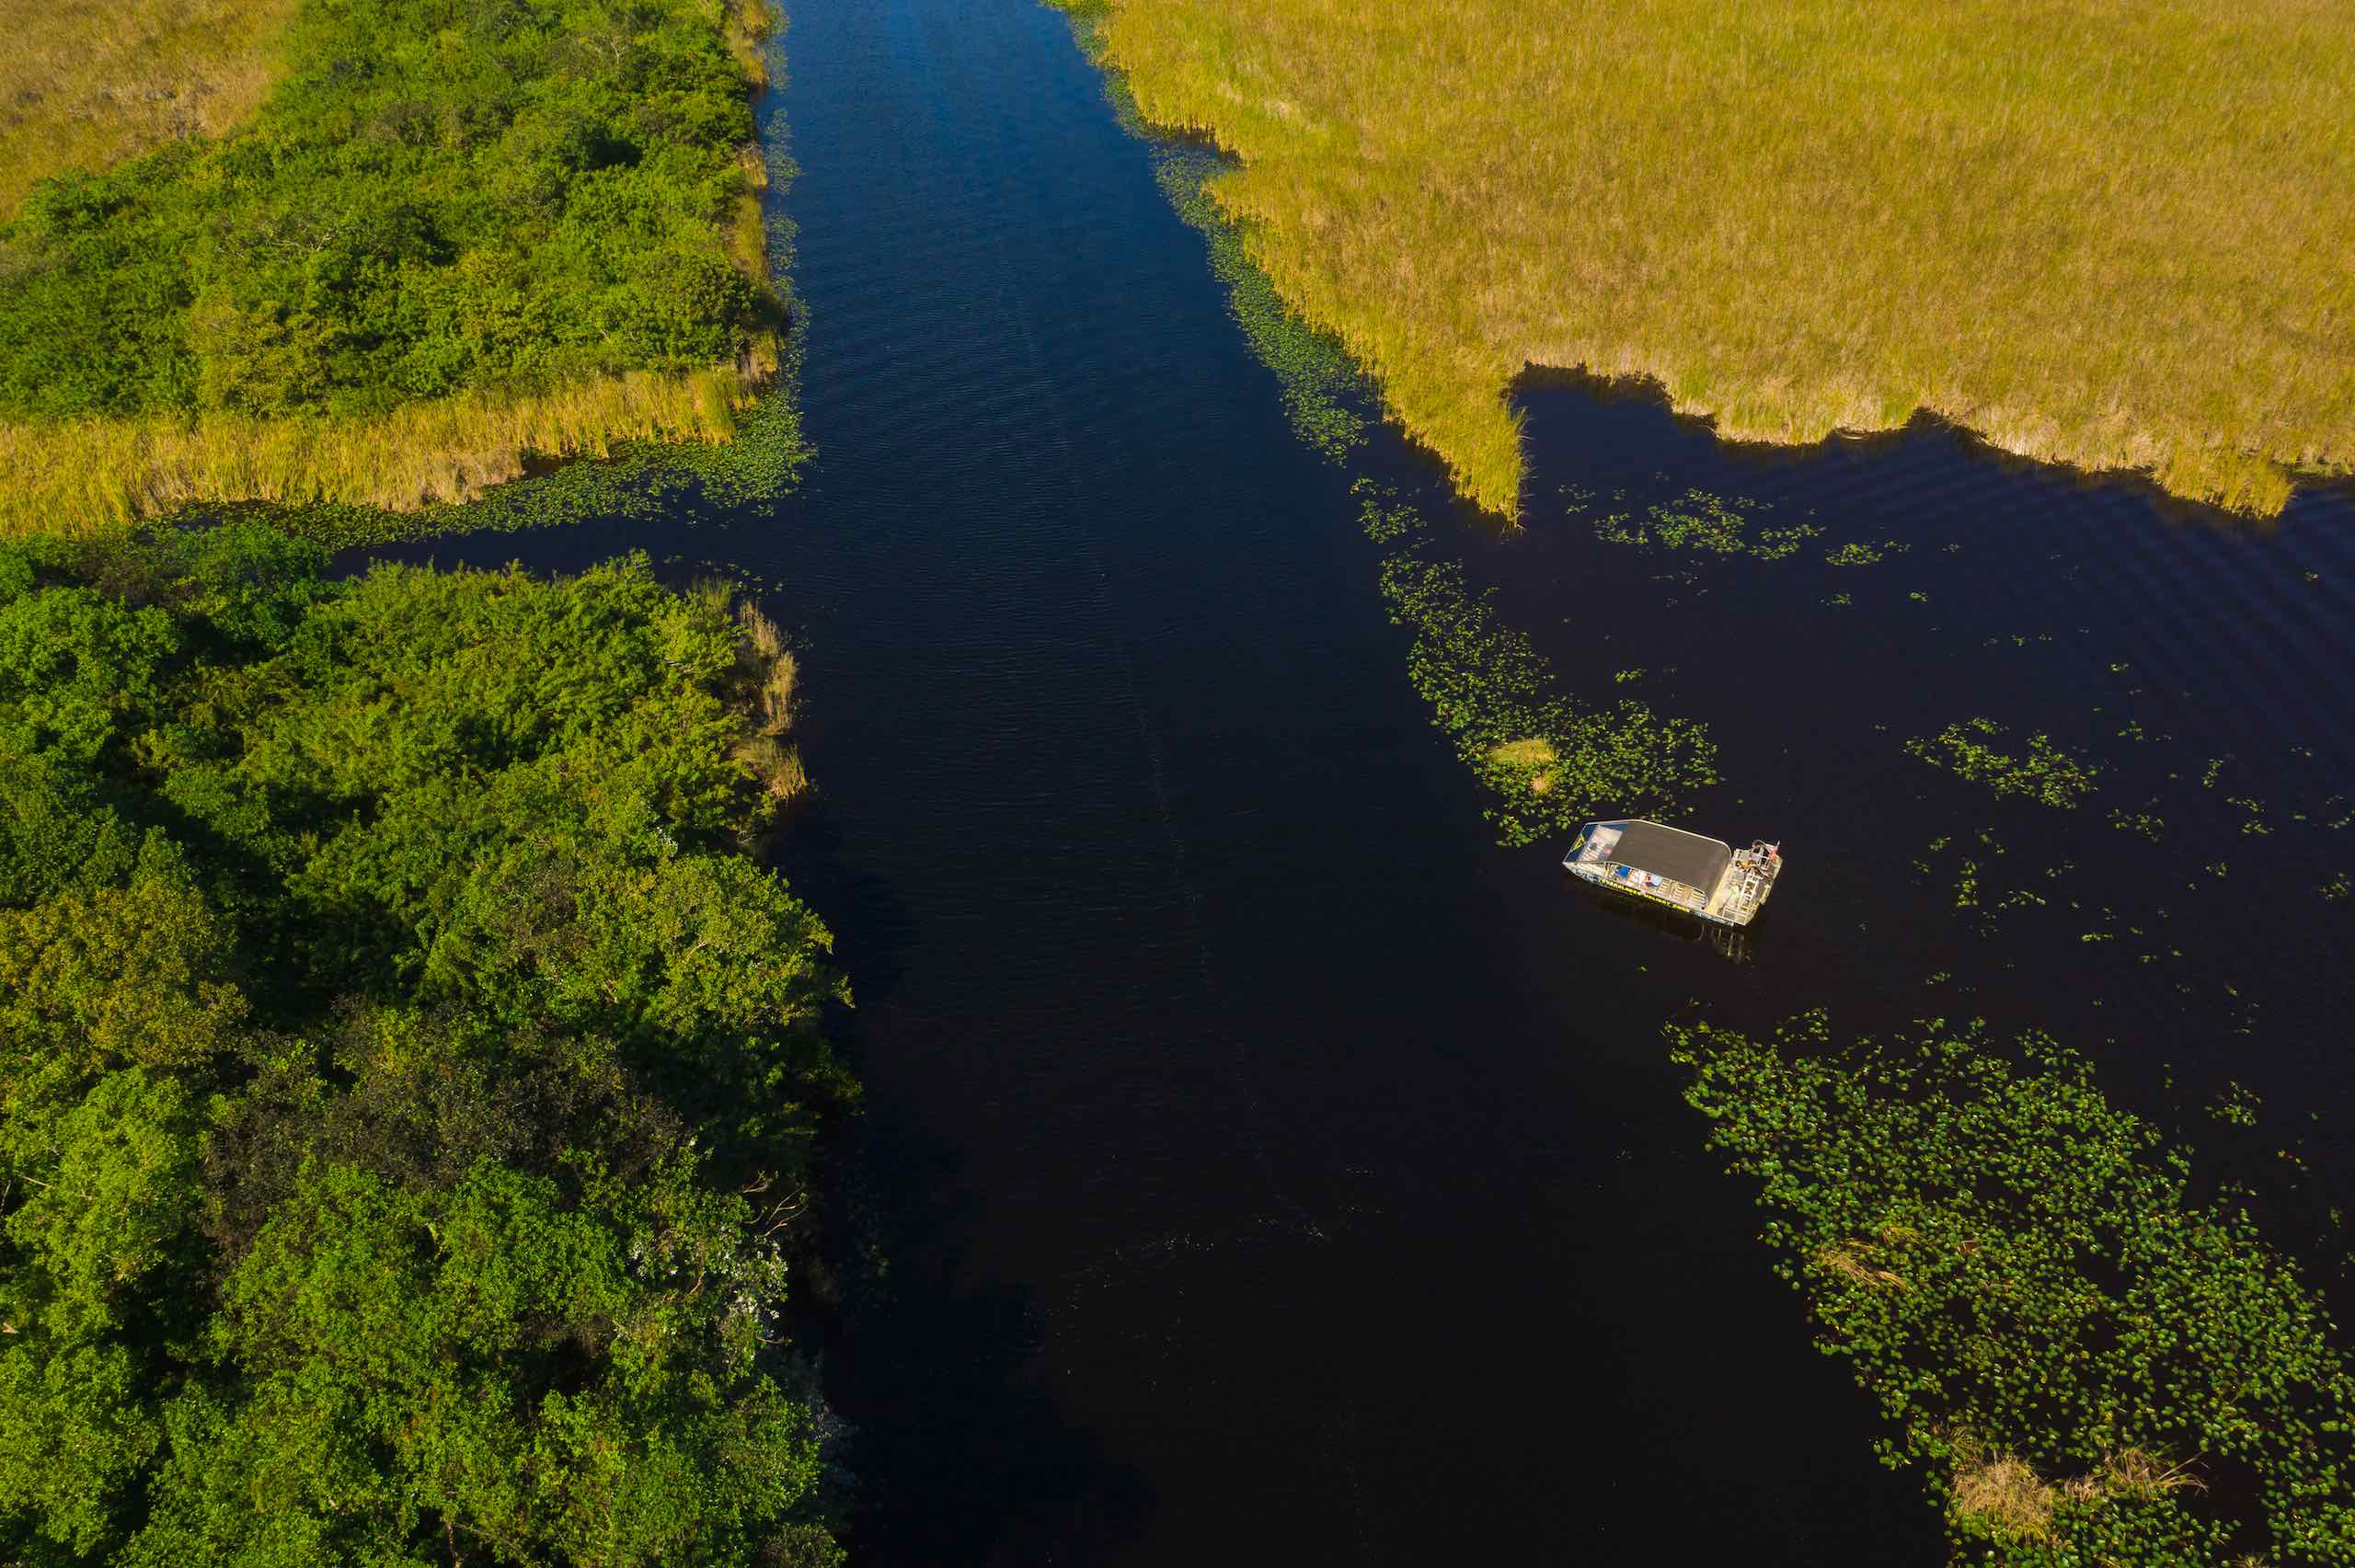 Everglades Holiday Park Aerial of an airboat on the water